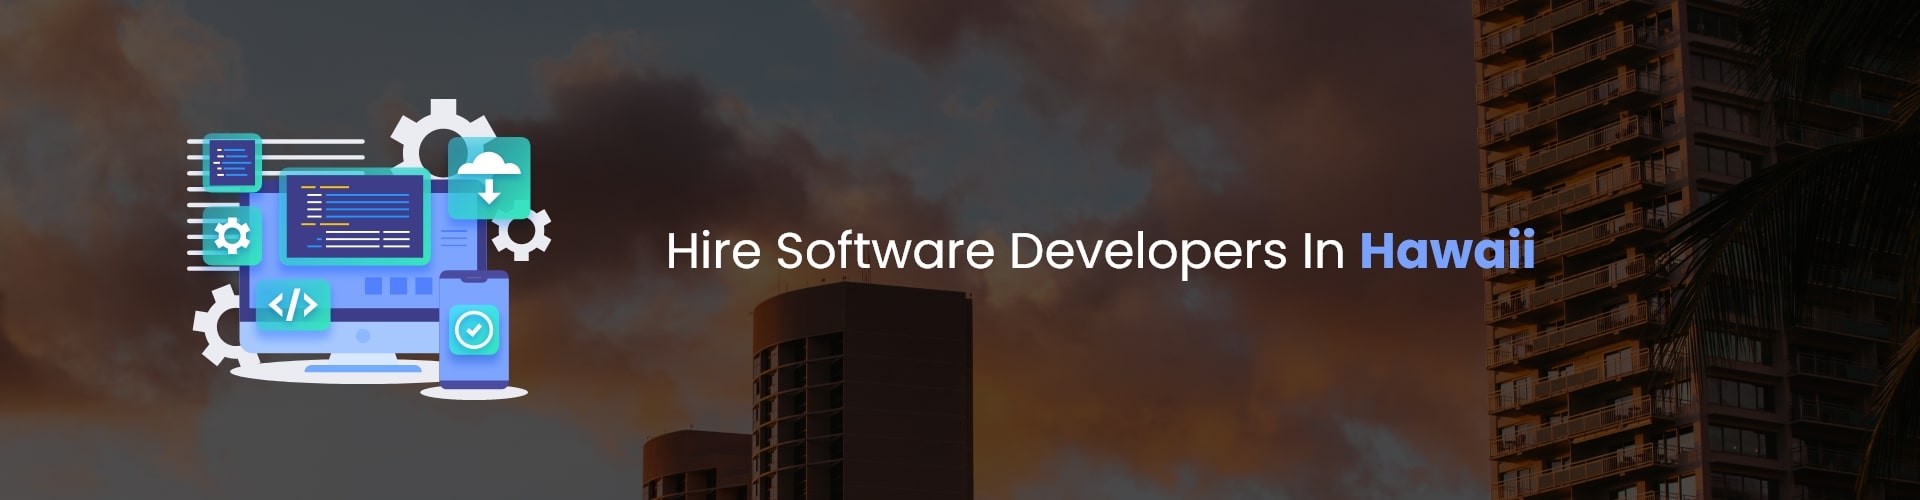 hire software developers in hawaii